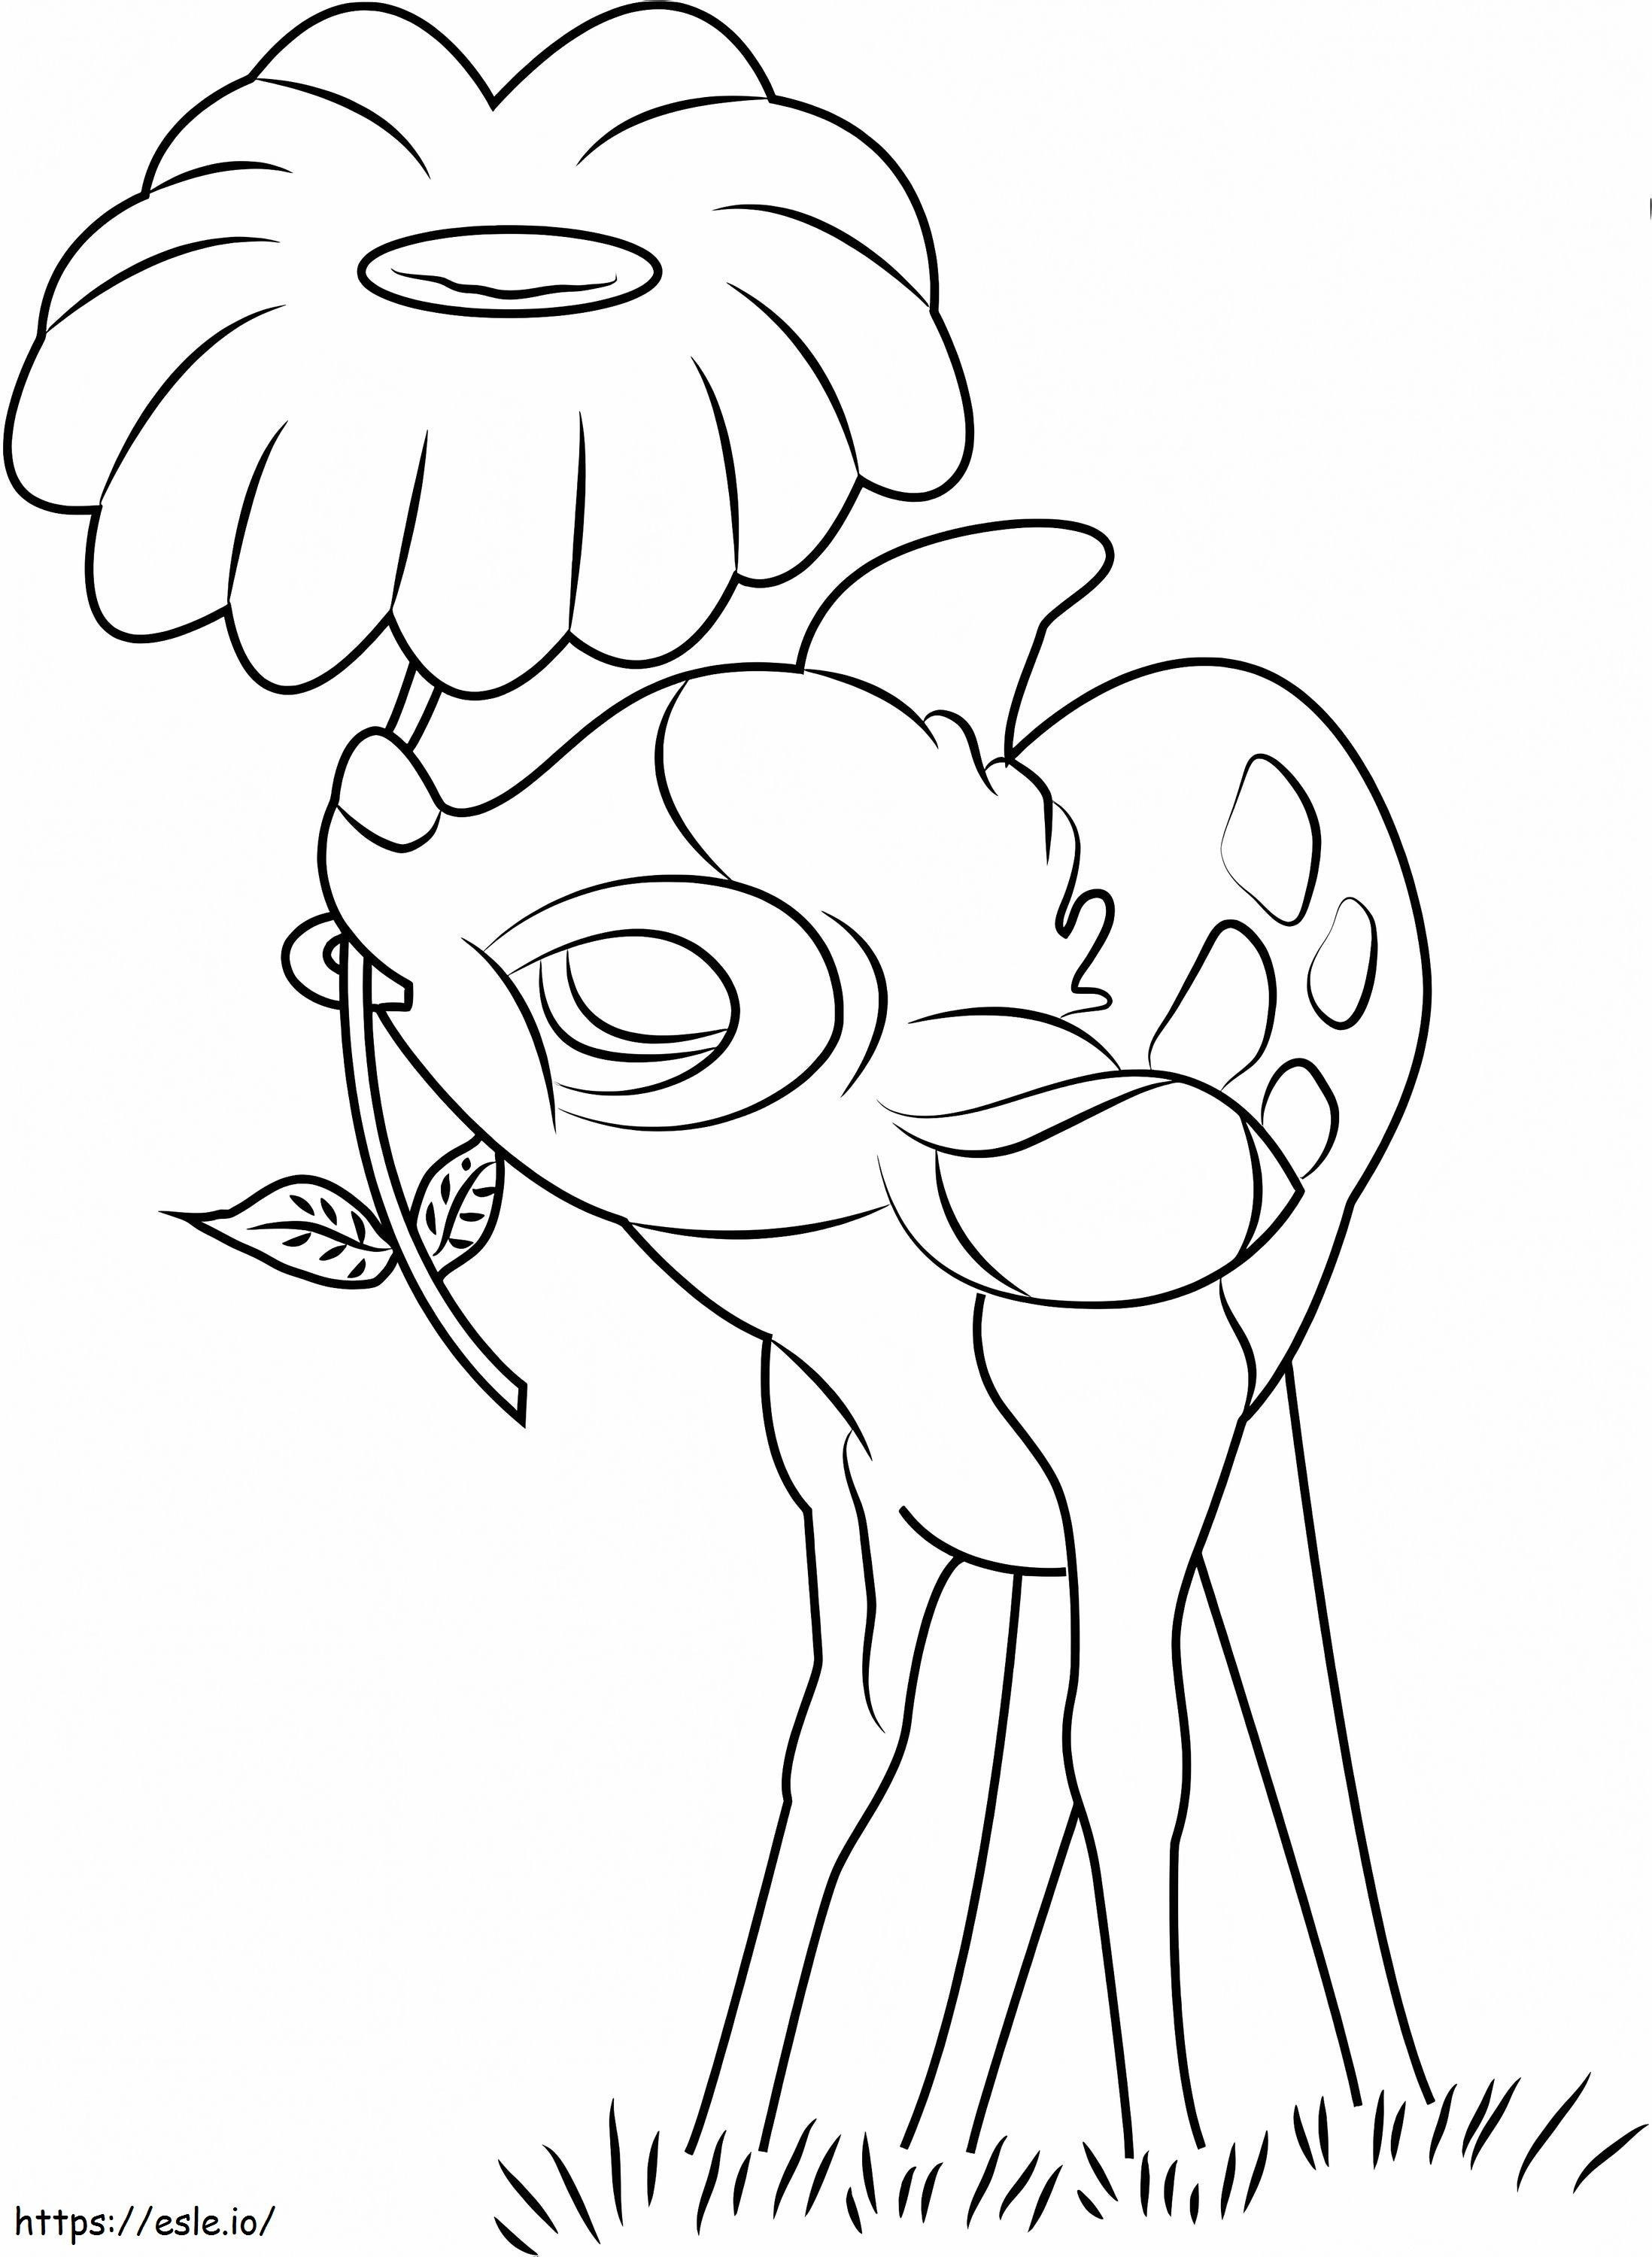 Bambi Gnawing Flower coloring page